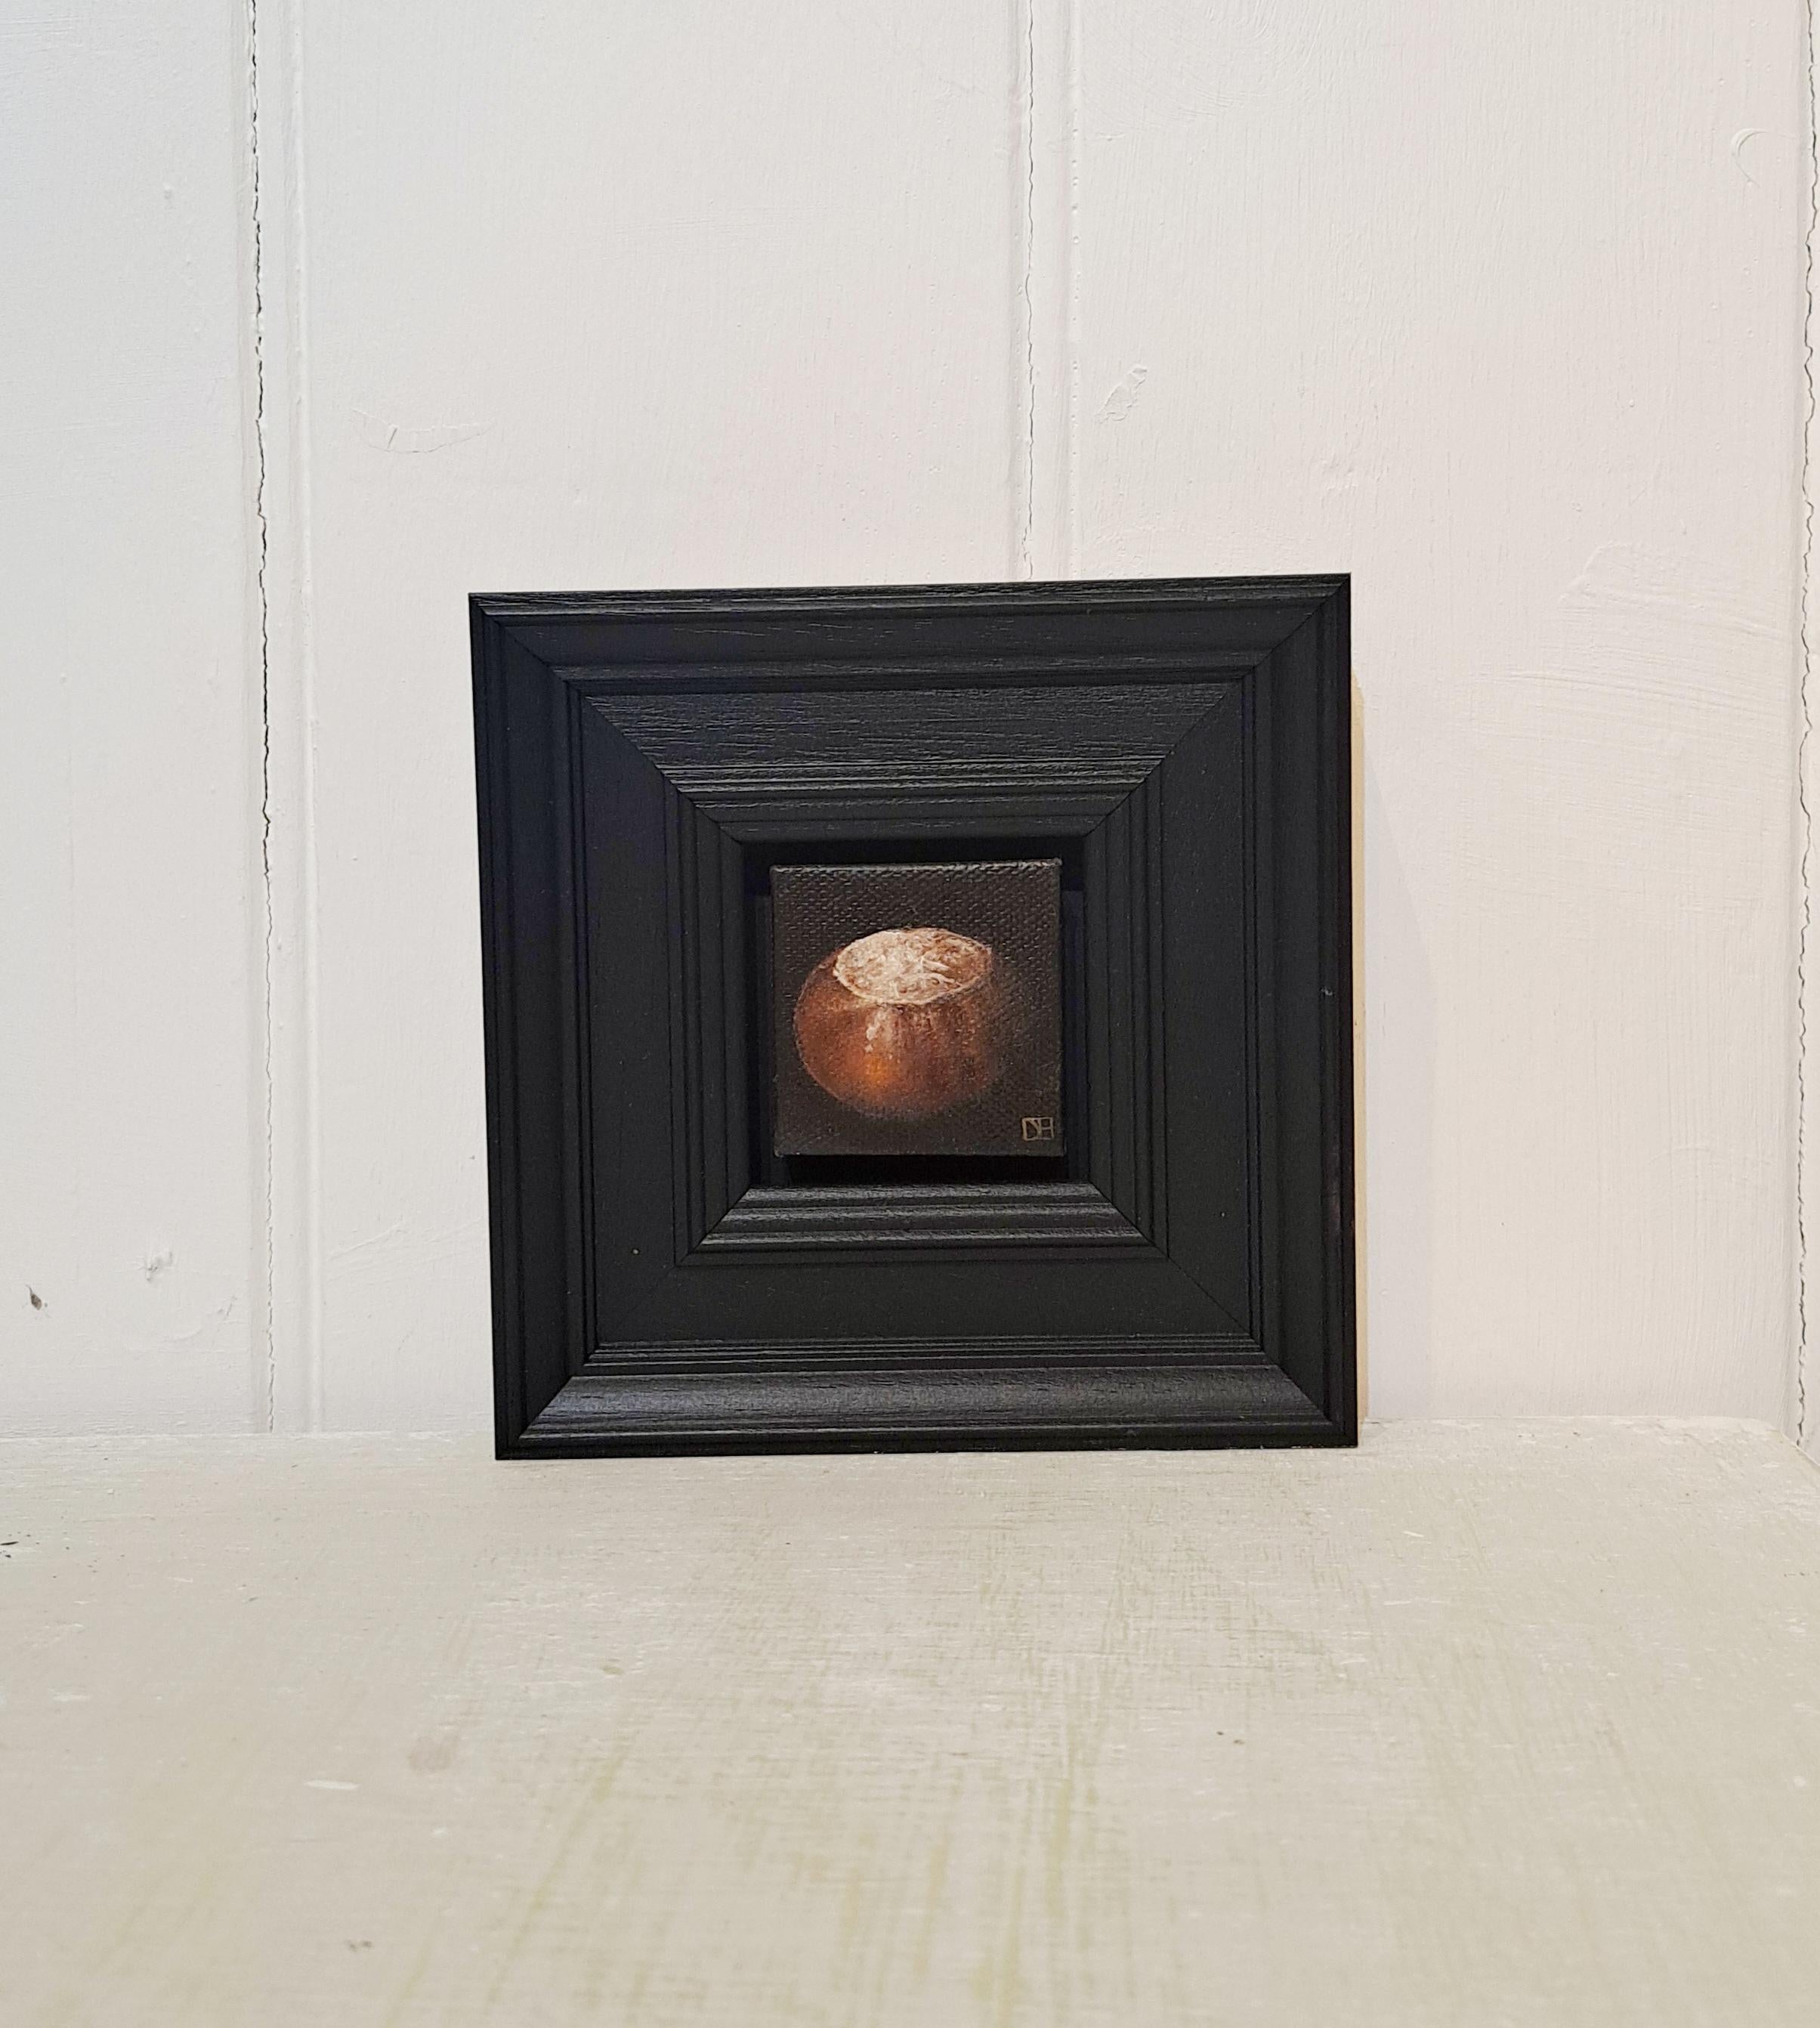 Pocket Conker [2023] is an original oil painting by Dani Humberstone as part of her Pocket Painting series featuring small scale oil realistic oil paintings with a nod to baroque still life. The paintings are set in a black wood layered